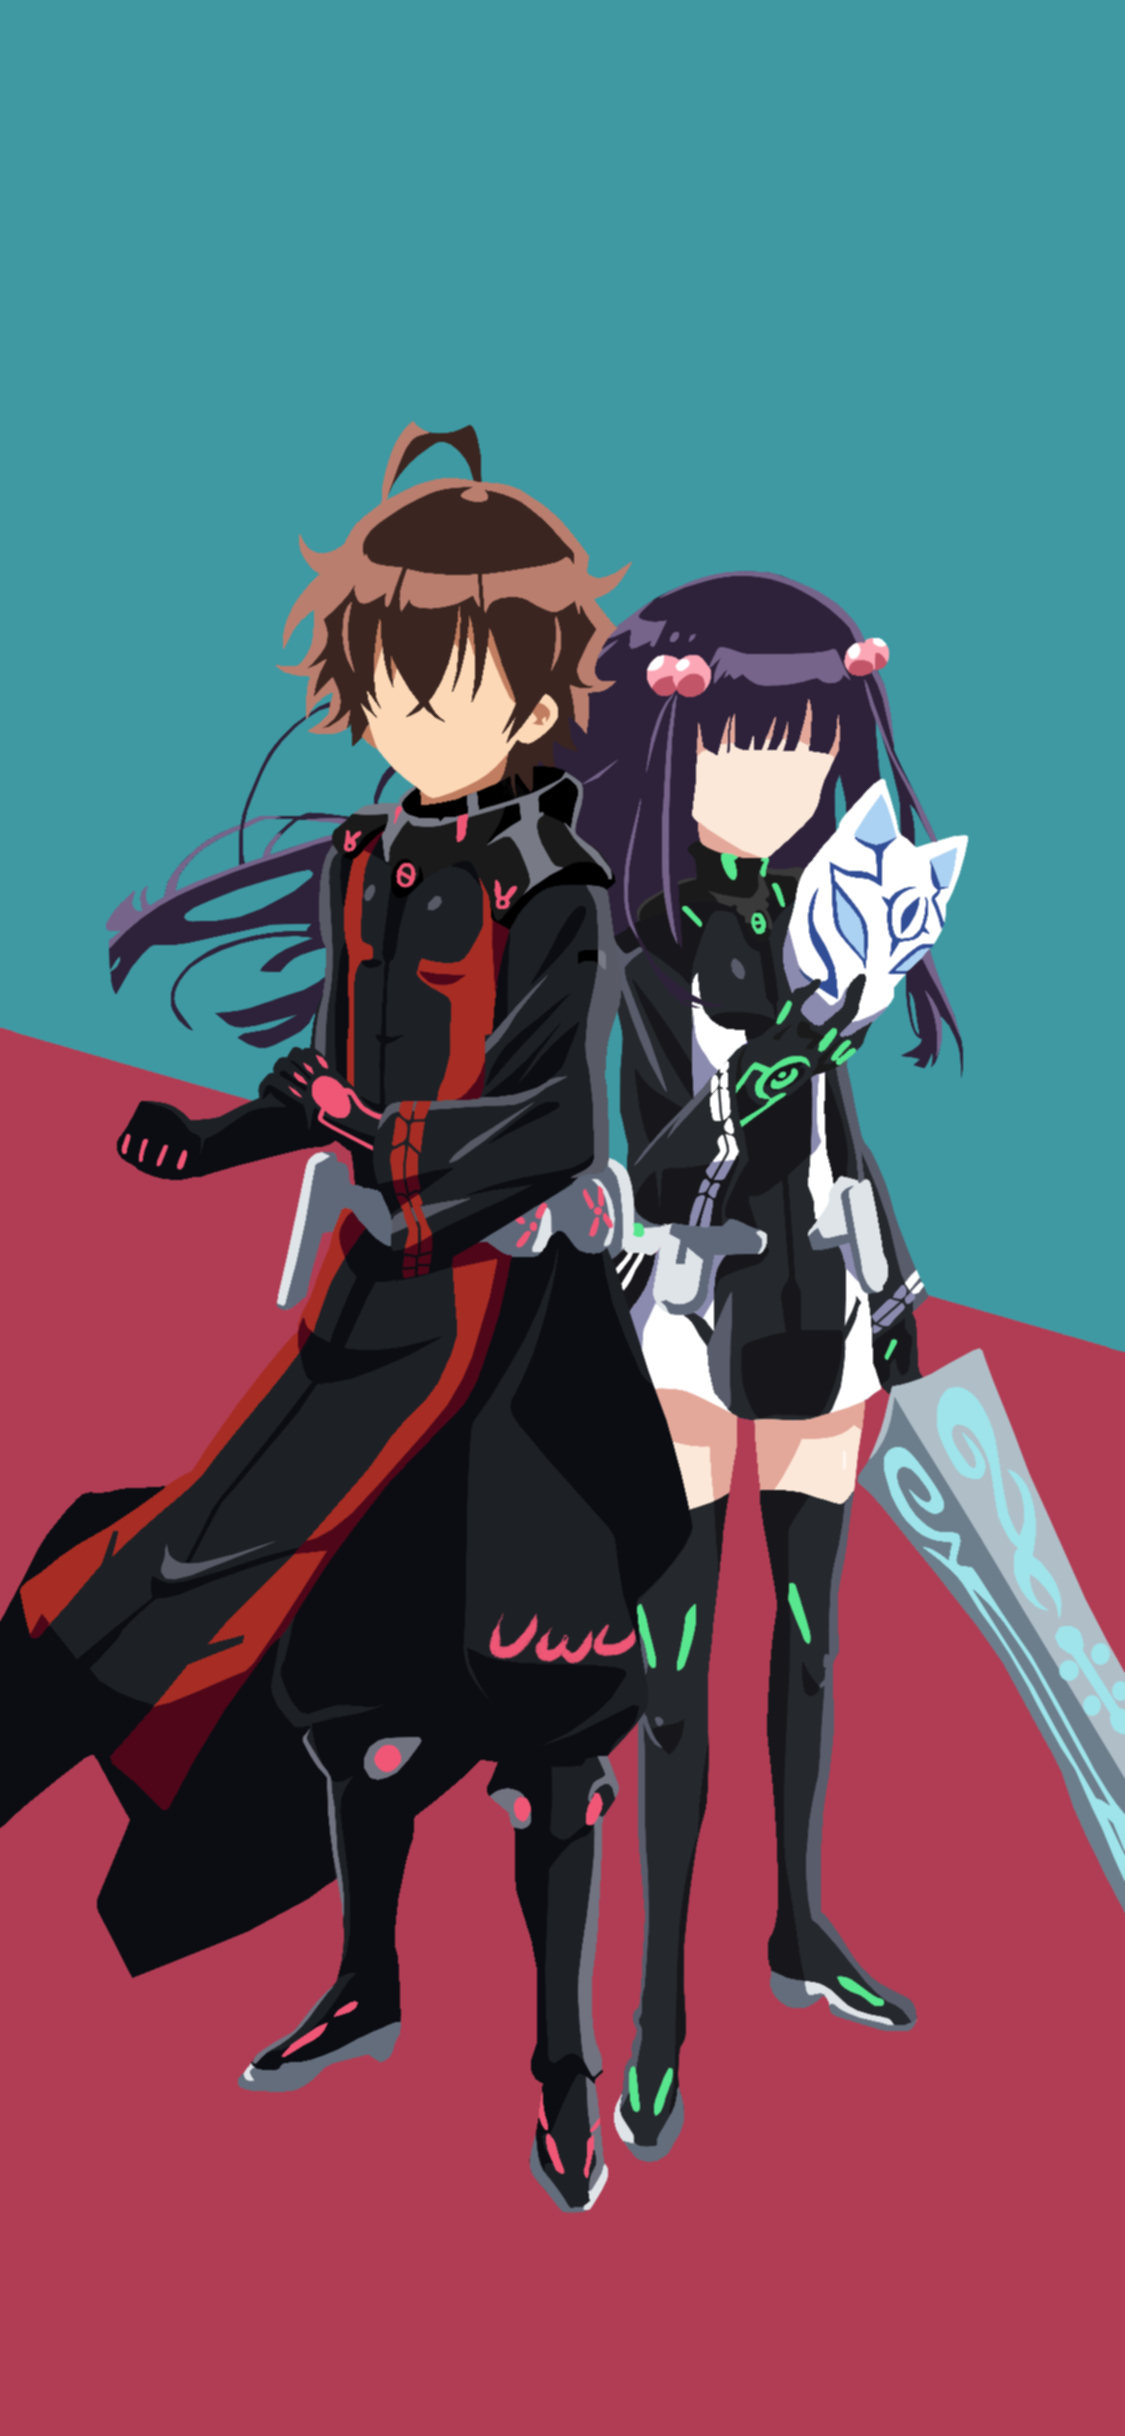 Twin Star Exorcists Characters by ArtWoman1998 on DeviantArt